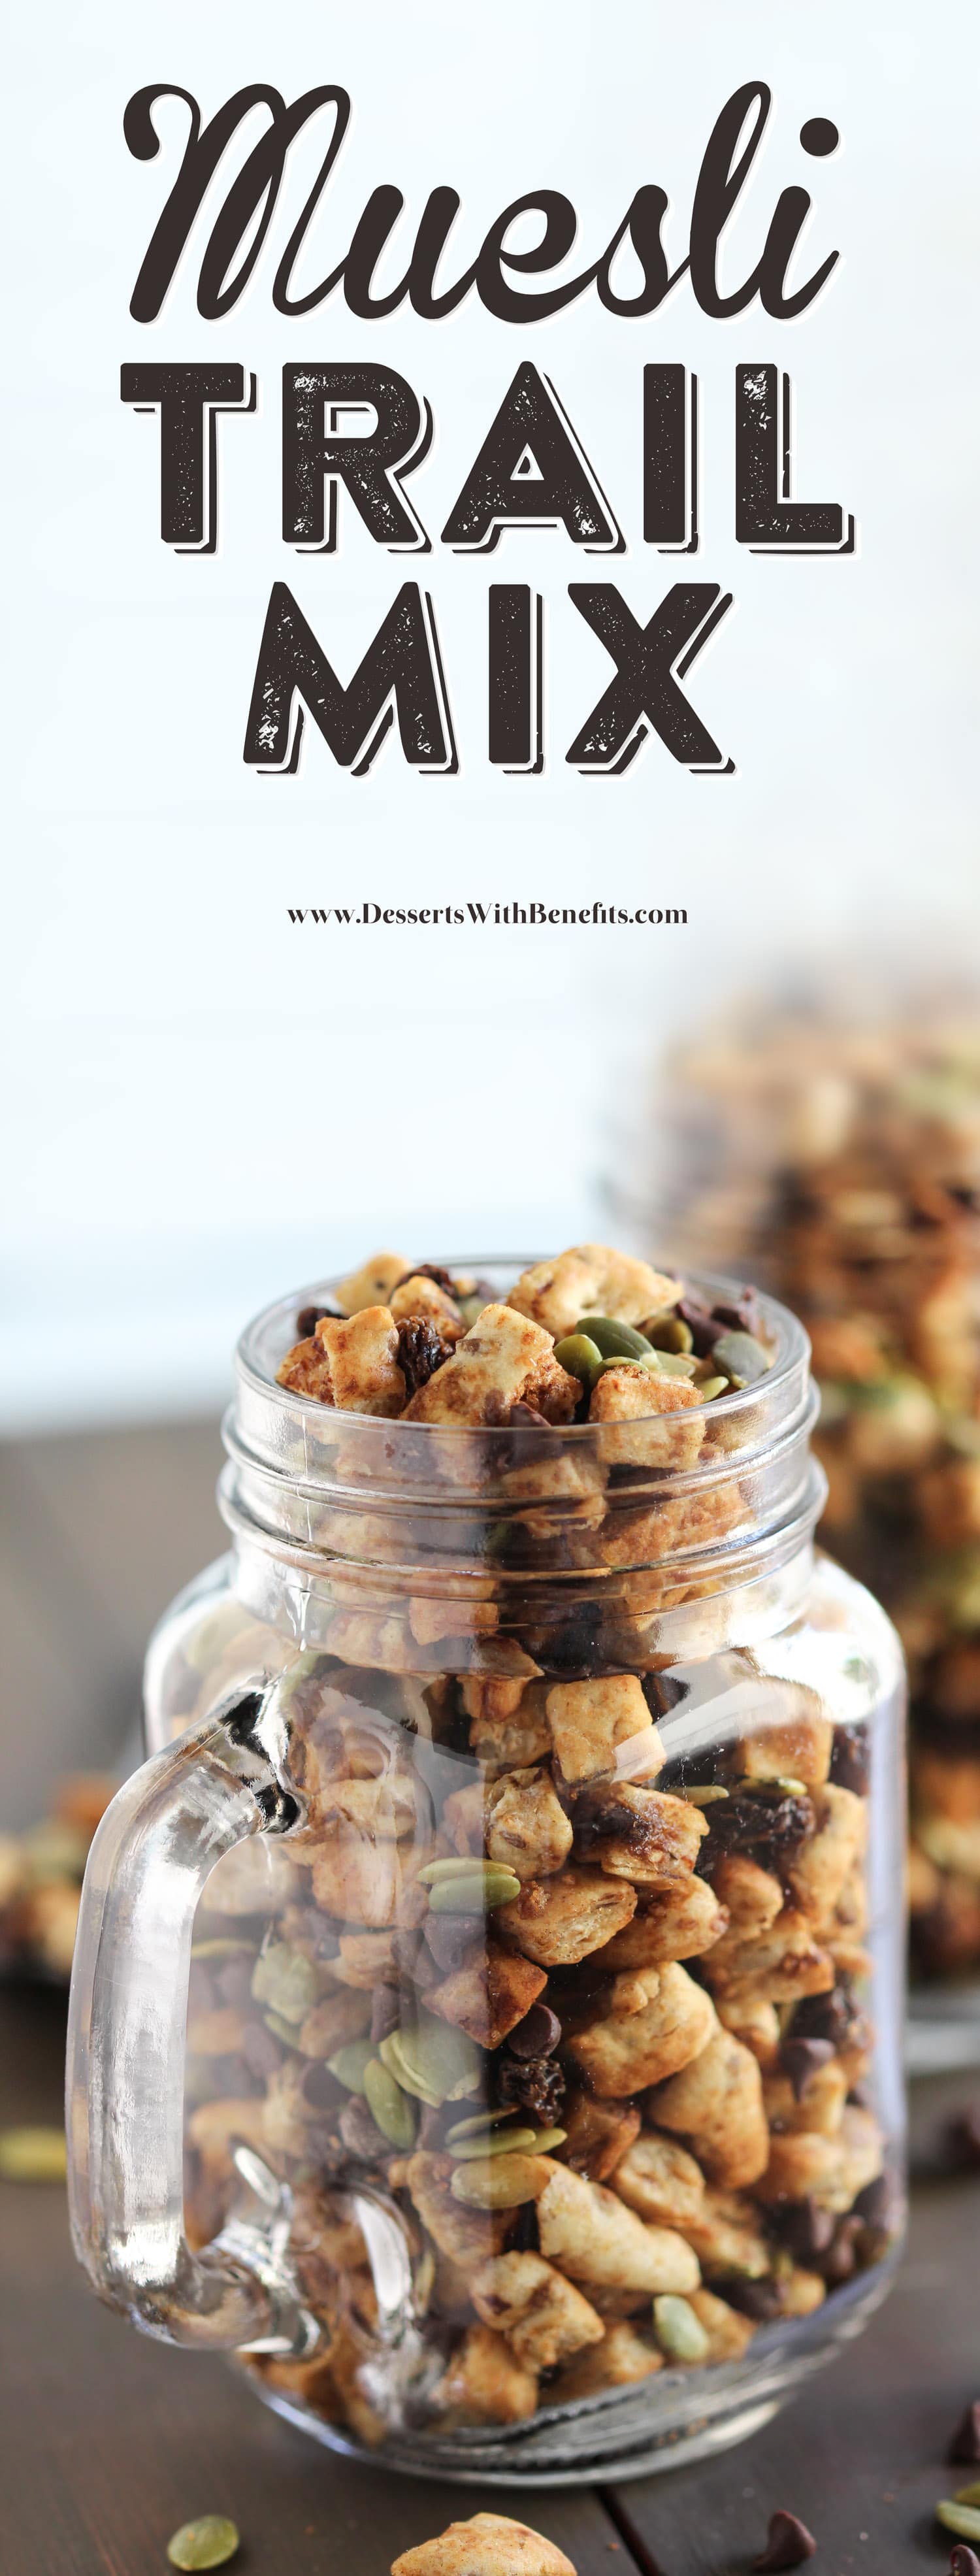 Swap boring trail mix with this Healthy Muesli Trail Mix! It’s a fun, nutritious snack filled with pumpkin seeds and baked "muesli" for crunch, soft and chewy raisins for sweetness, and mini chocolate chips for some decadence! (low sugar, dairy free, vegan) Healthy Dessert Recipes at the Desserts With Benefits Blog (www.DessertsWithBenefits.com).